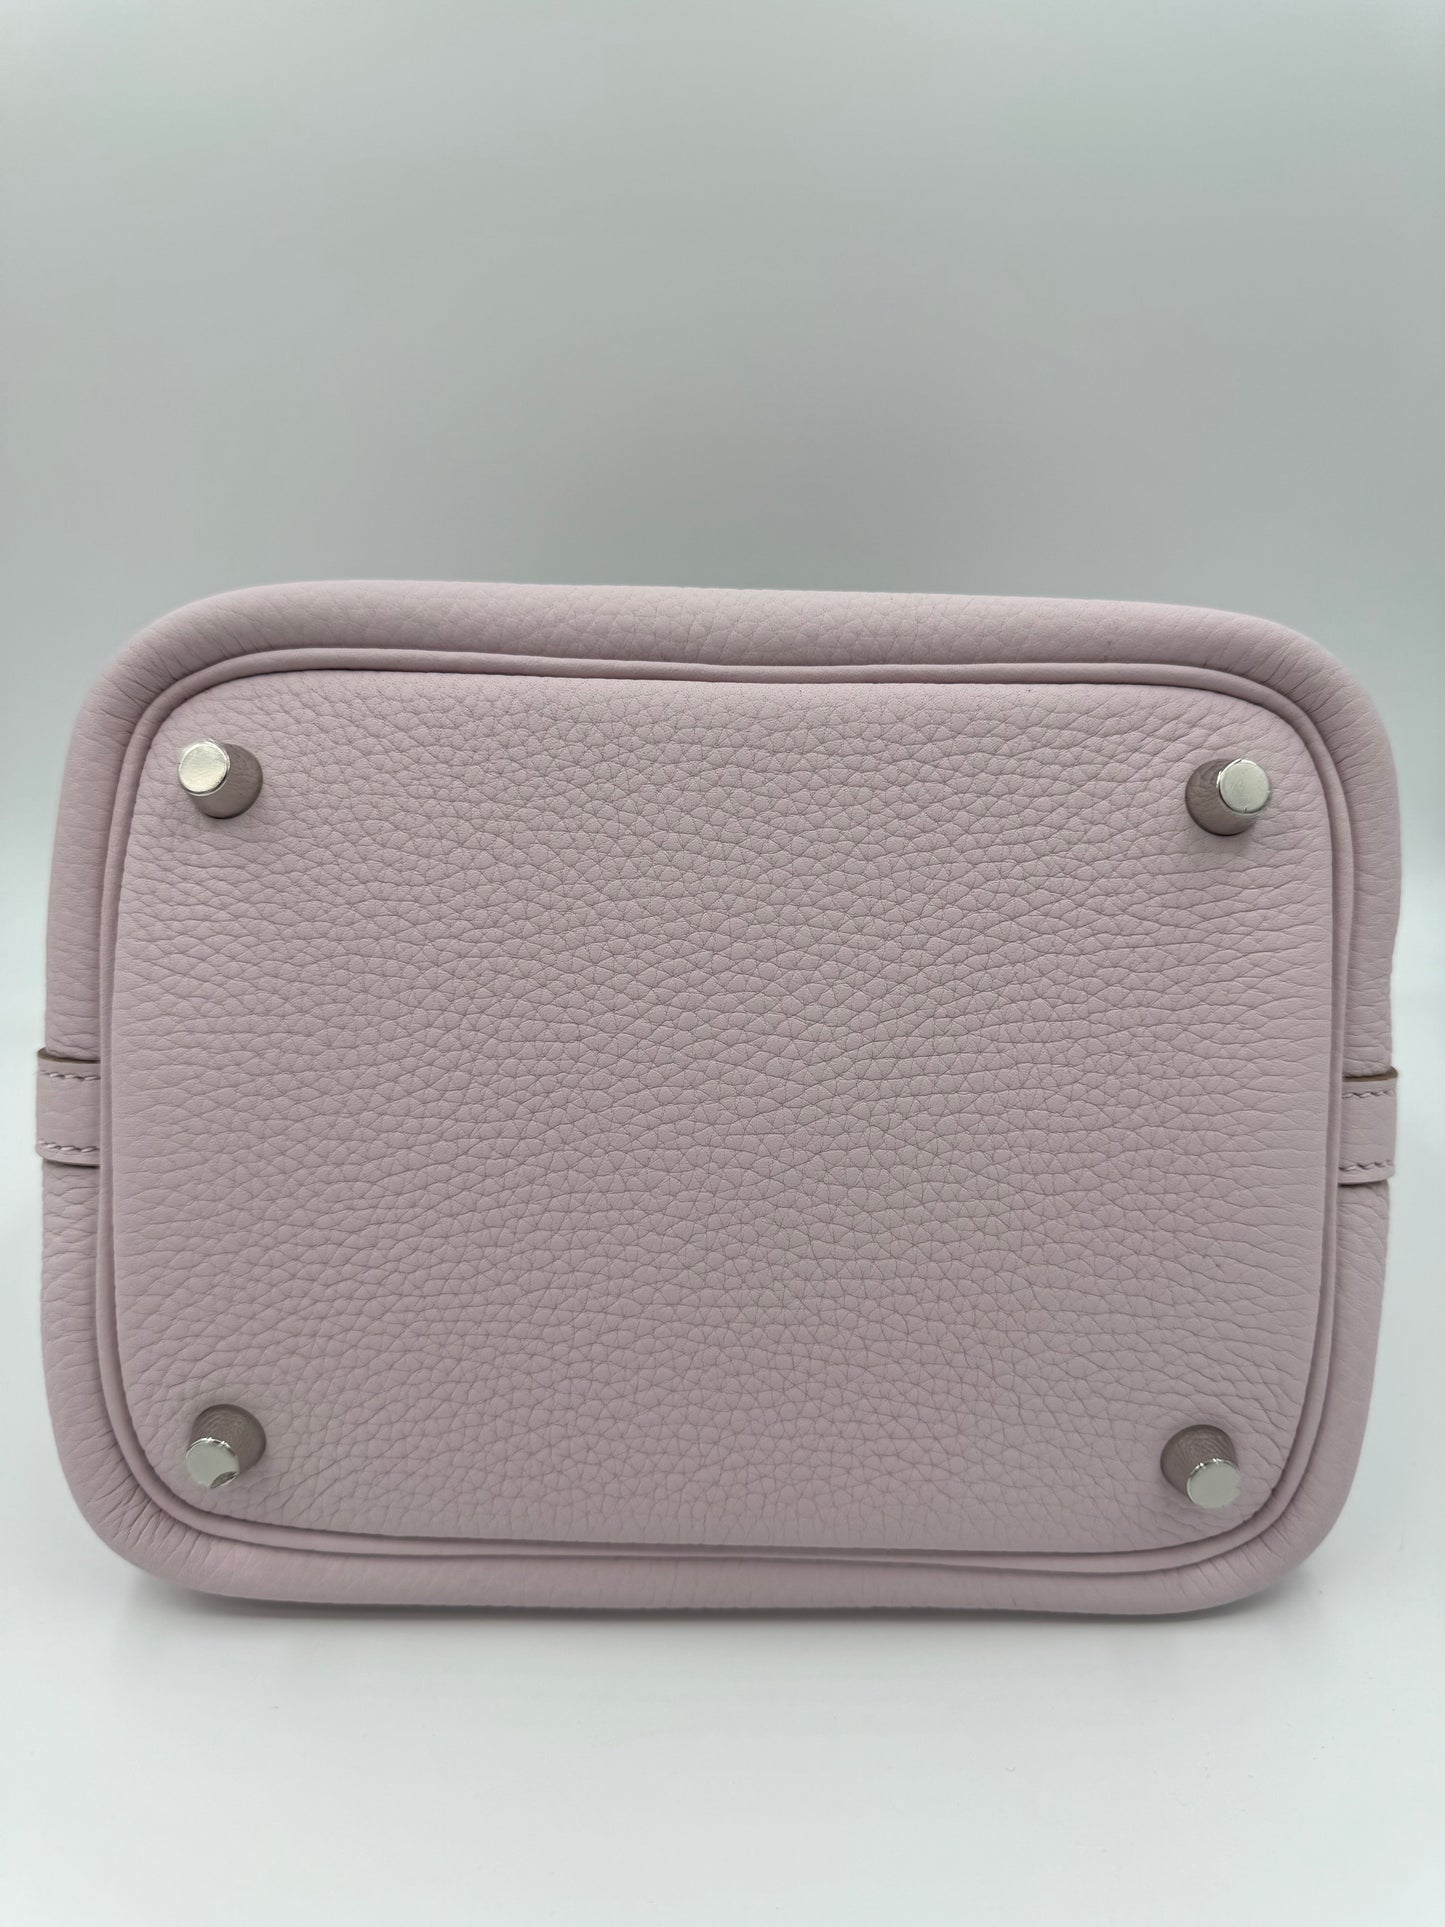 HERMES PICOTIN LOCK 18 TAURILLON CLEMENCE 09 MAUVE PALE STAMP W